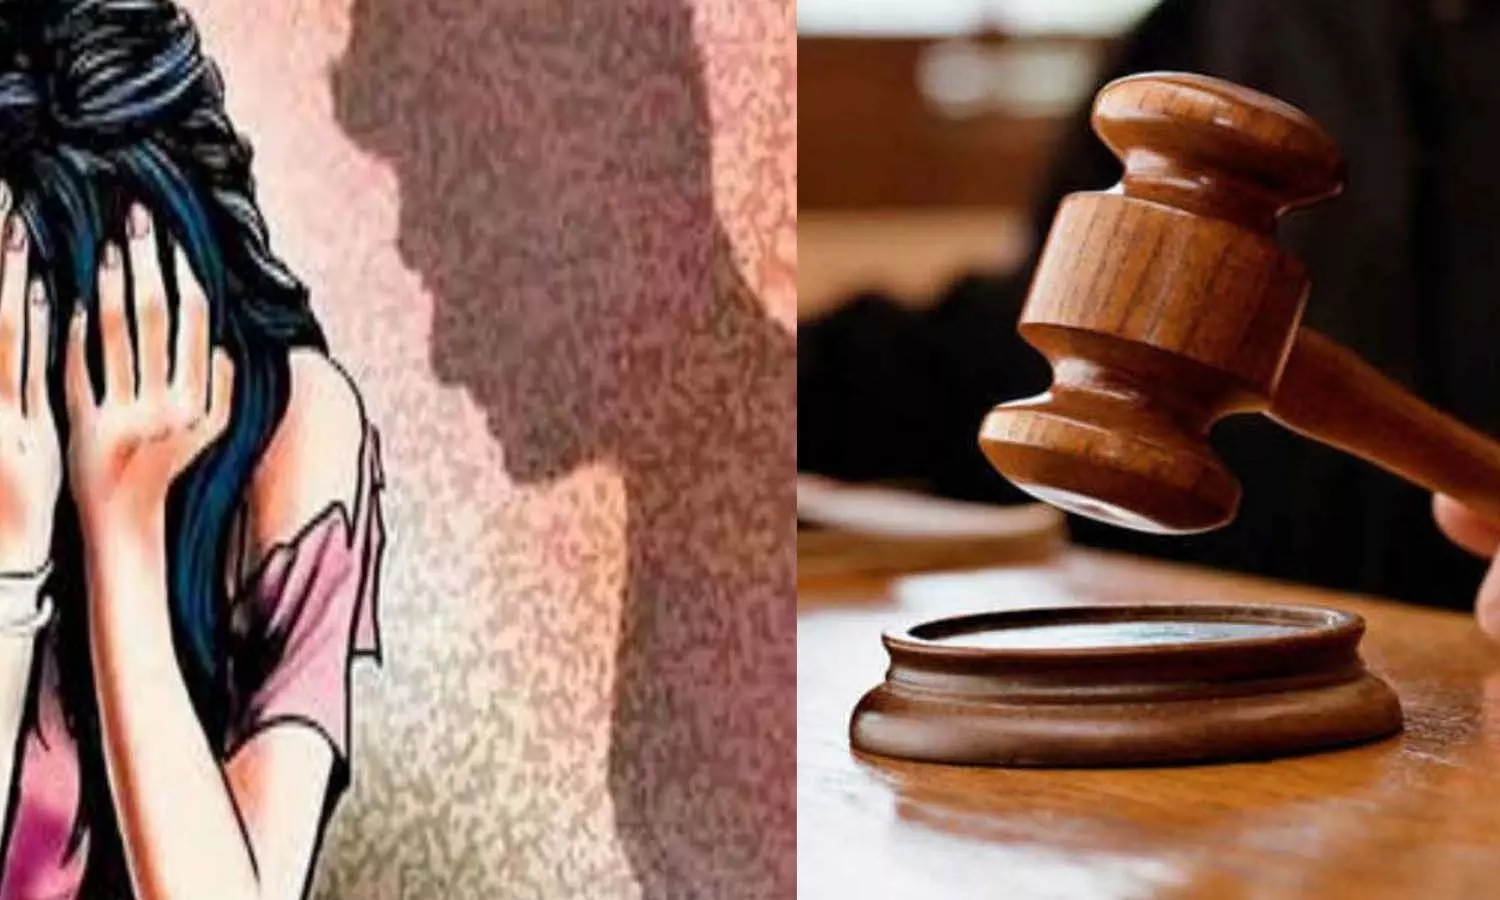 In Sonbhadra, a young man raped a girl suffering from fever, got life imprisonment